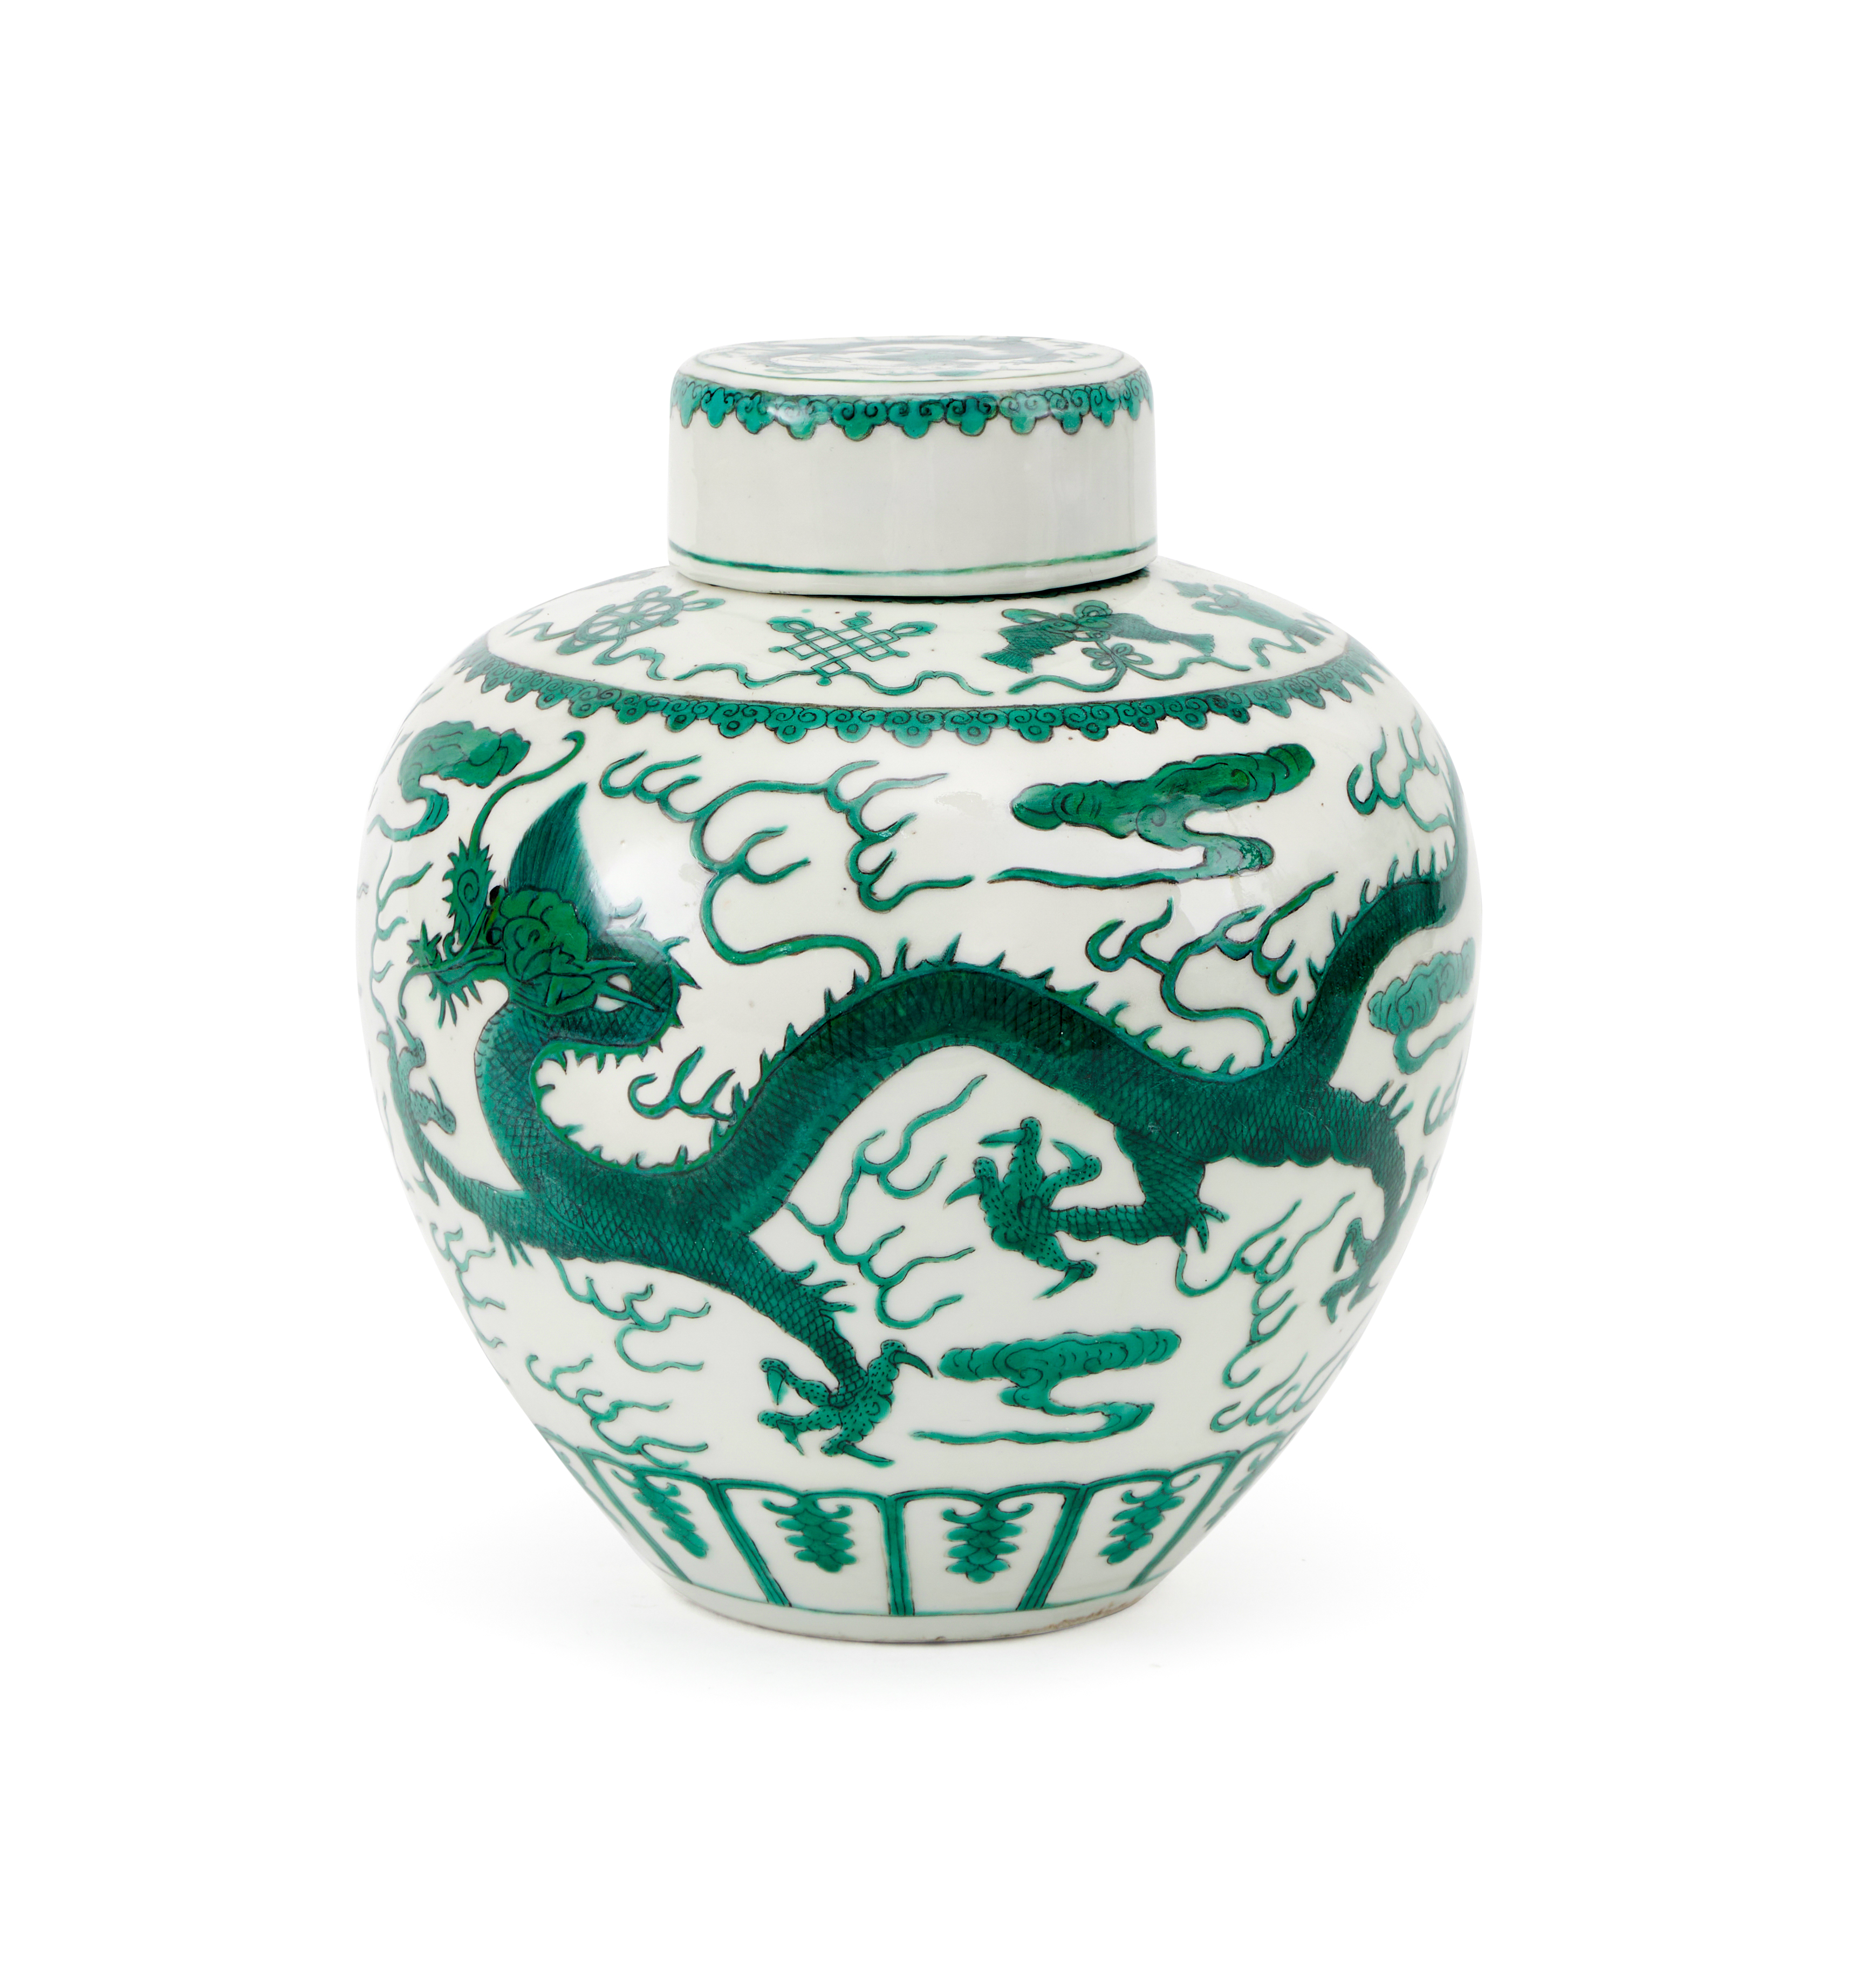 A FINE GREEN-ENAMELED 'DRAGON' JAR AND COVER